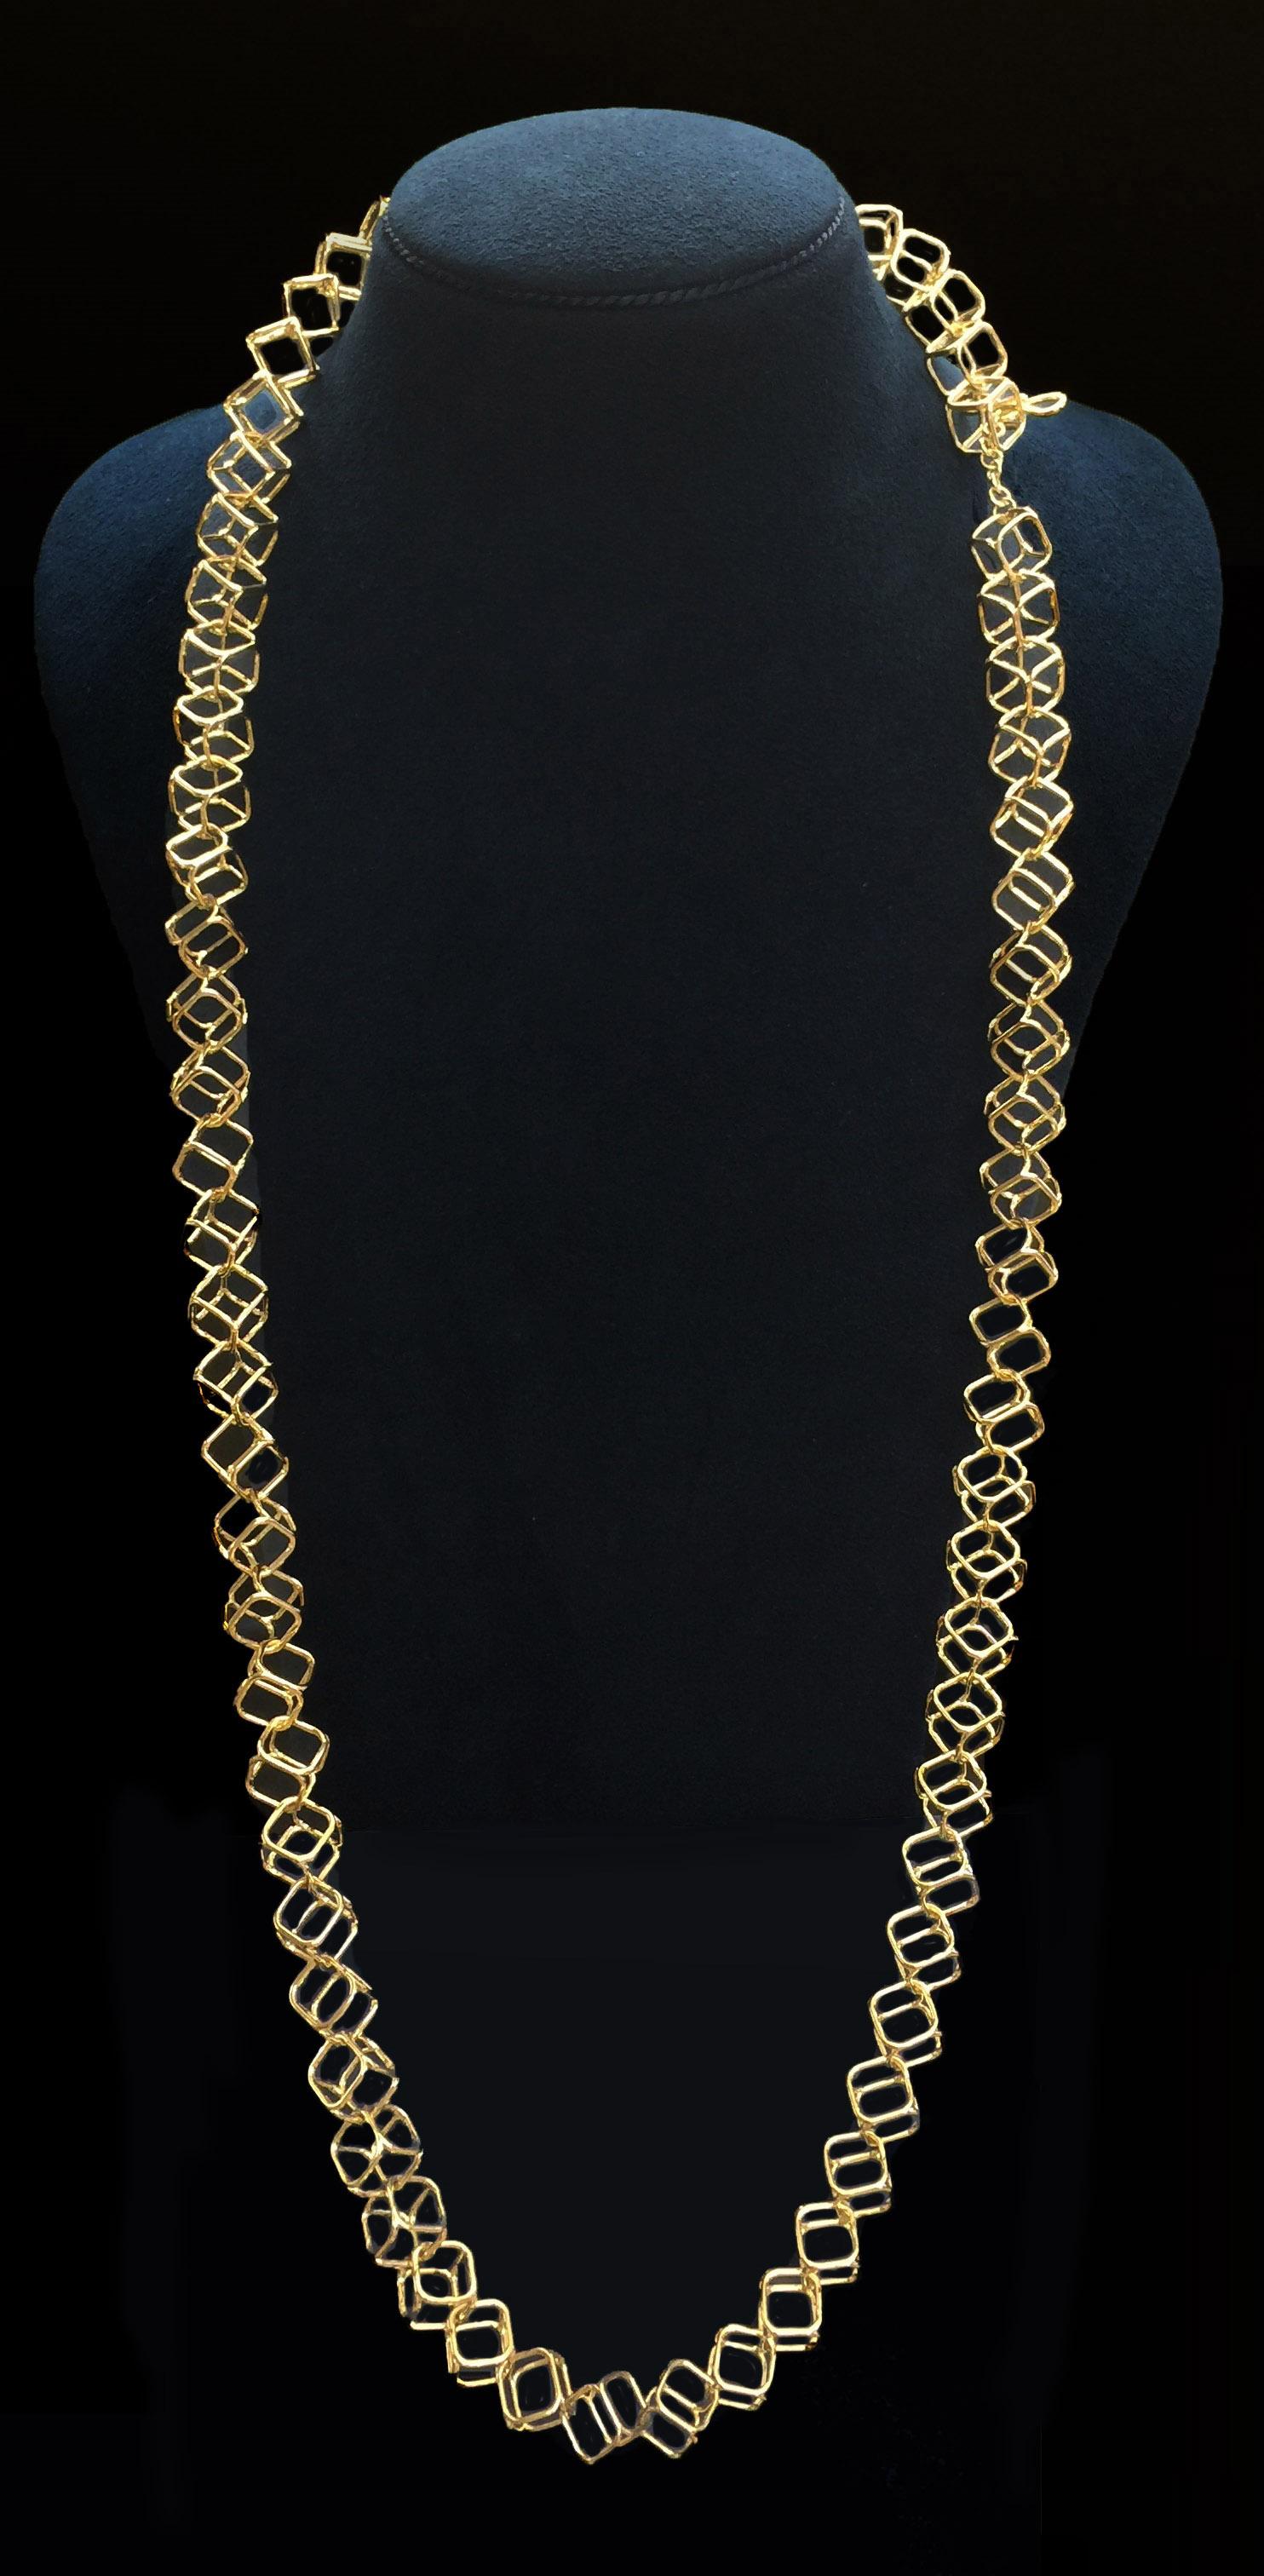 An openwork pattern gives a modern rendition to this chain necklace. Slender bars raise two square outlines to form an openwork cube. This connects to another cube by its corner, forming a chain design made entirely of 18k yellow gold. A knot and